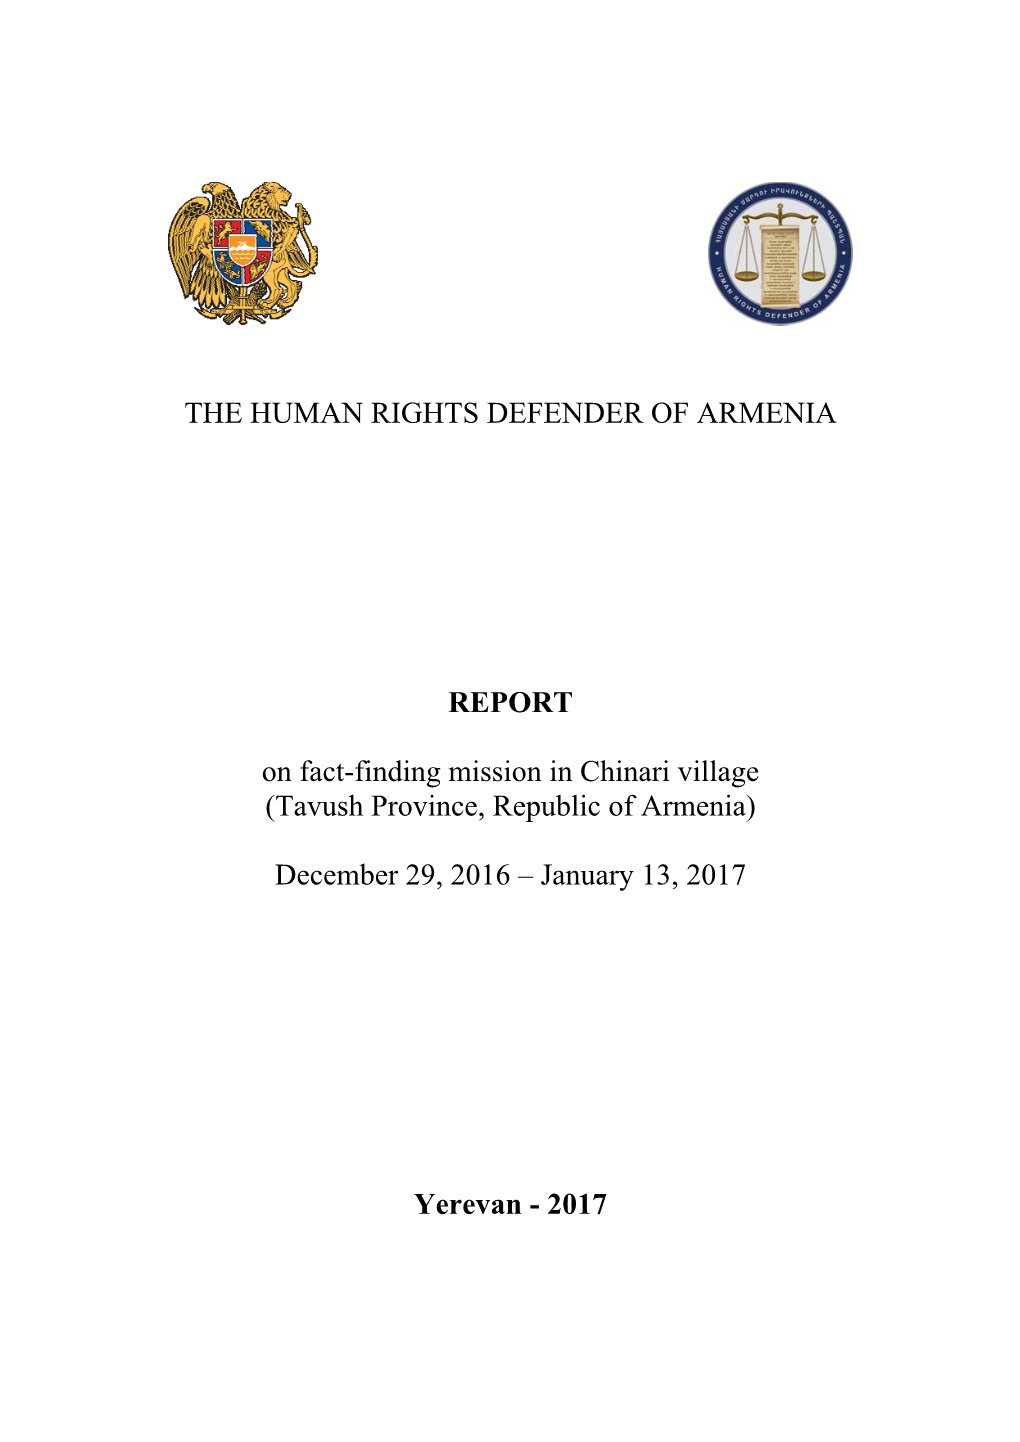 THE HUMAN RIGHTS DEFENDER of ARMENIA REPORT on Fact-Finding Mission in Chinari Village (Tavush Province, Republic of Armenia) D